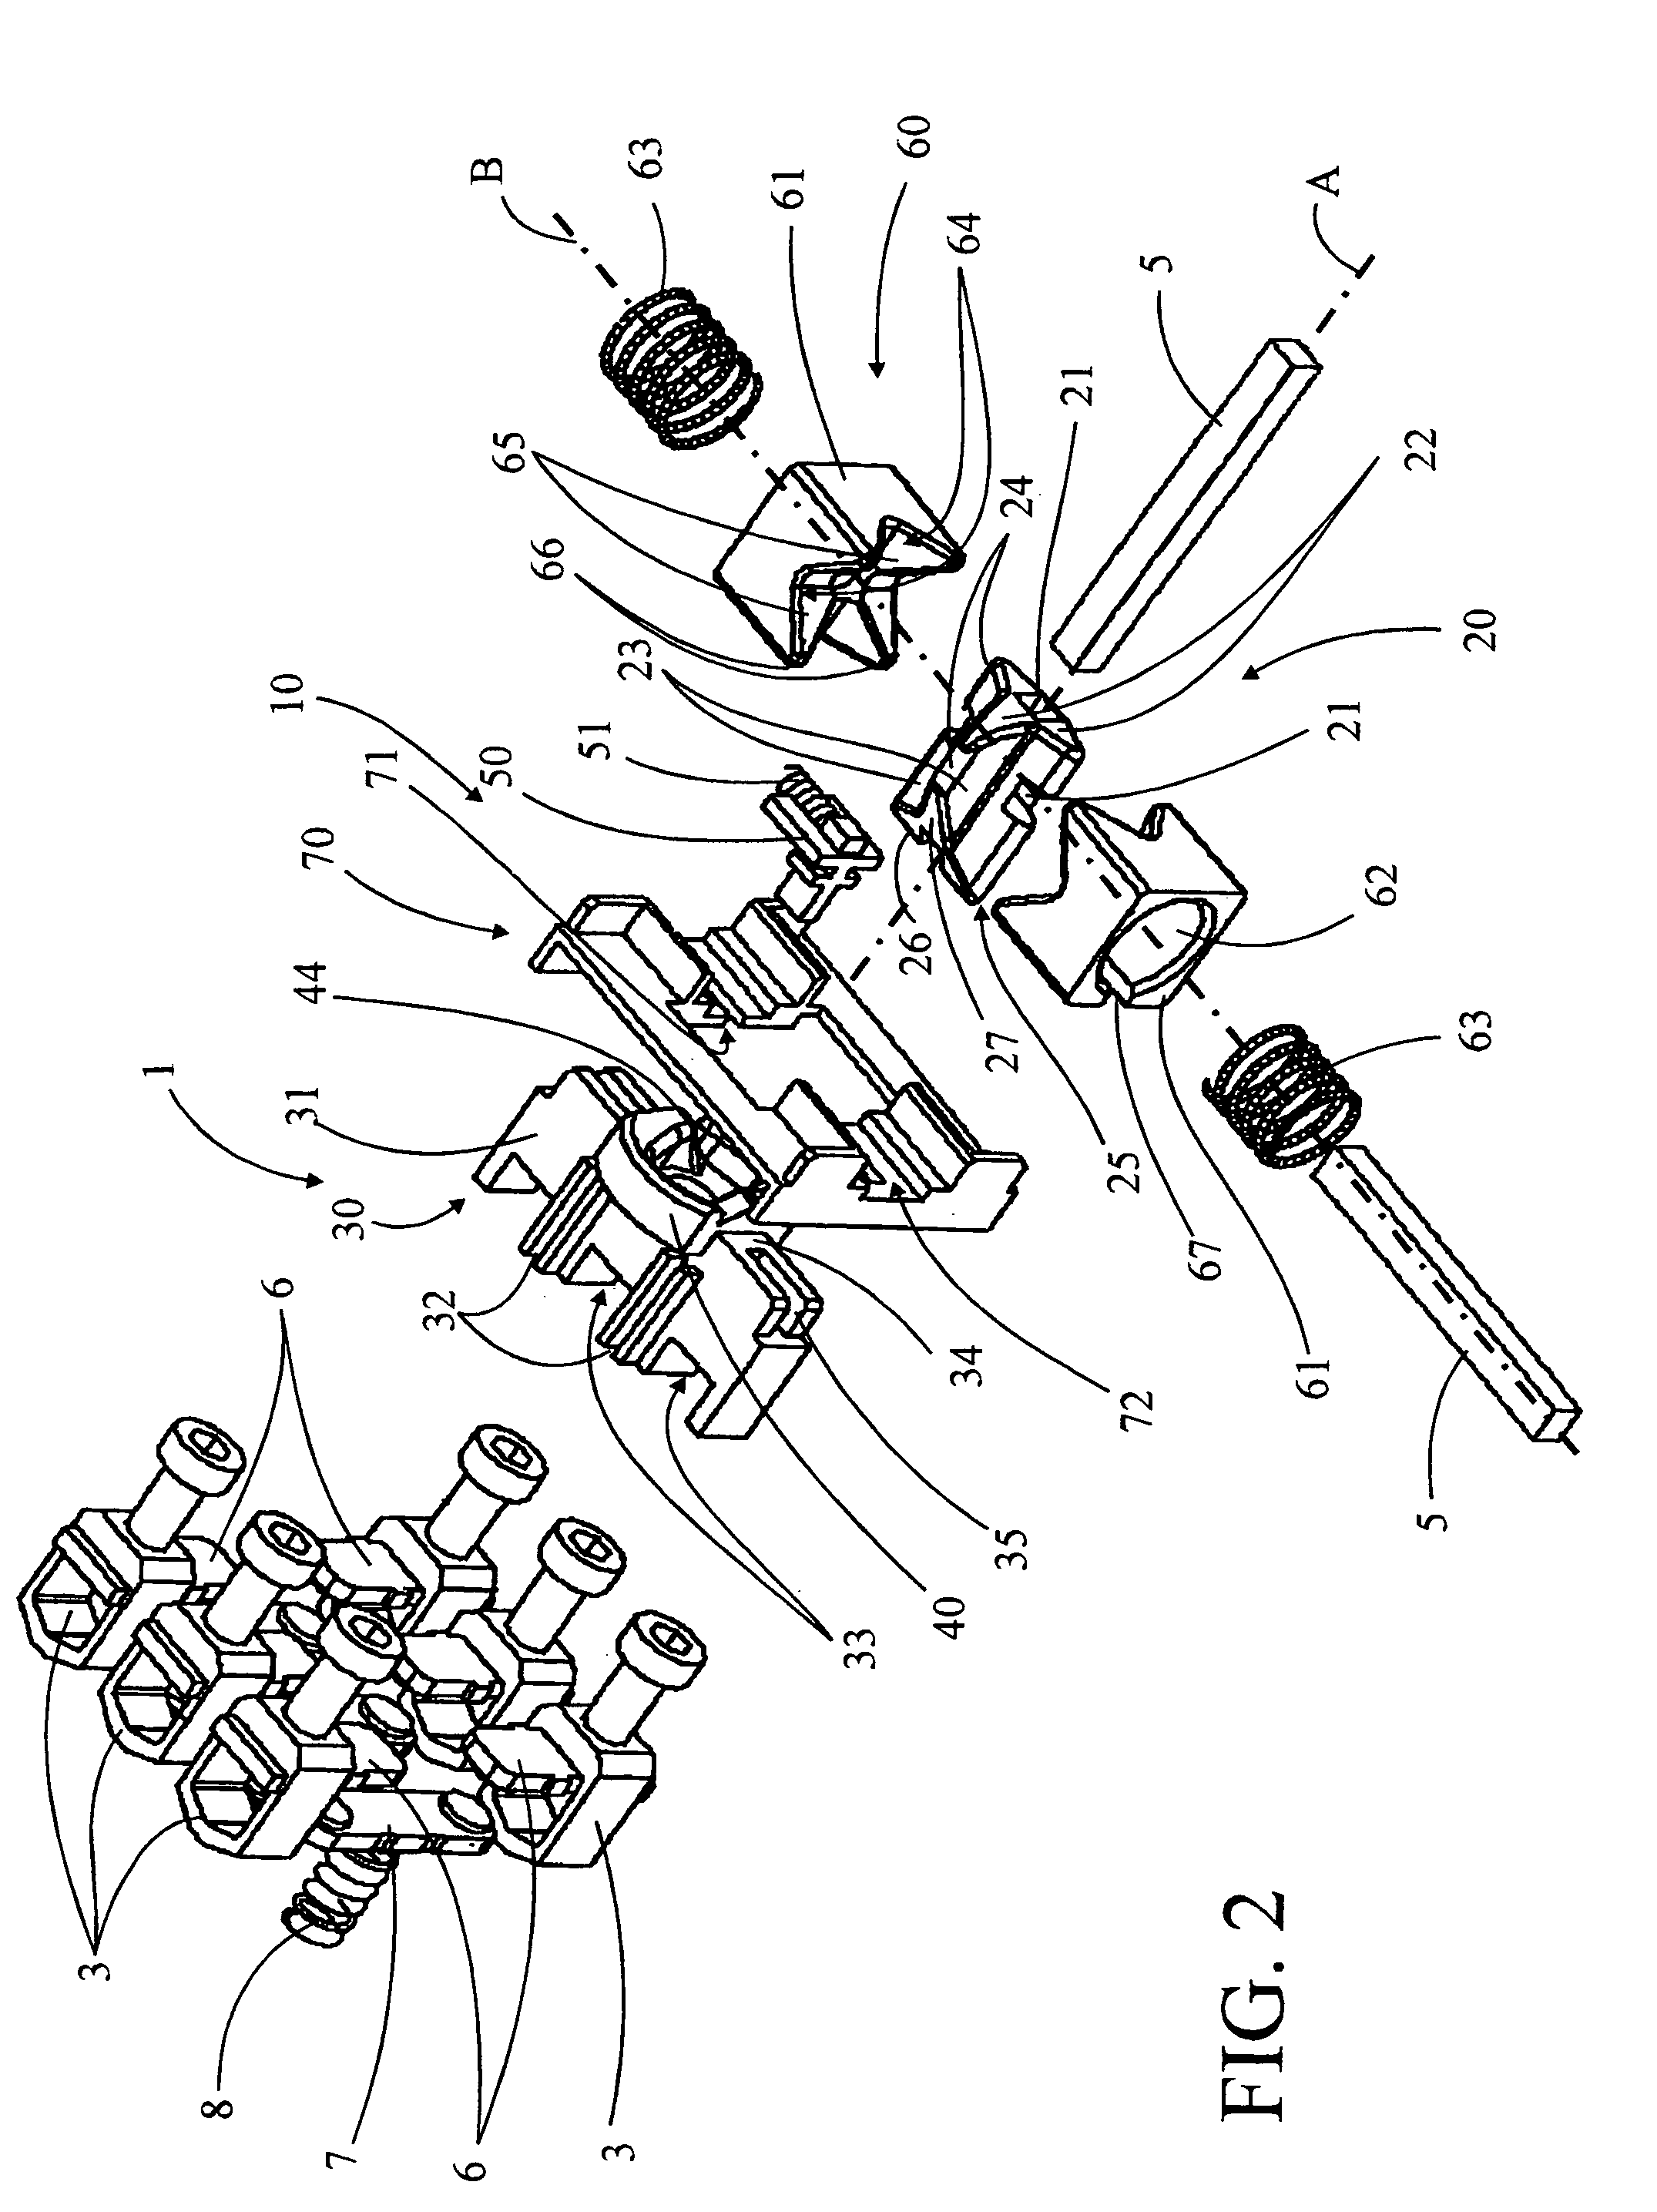 Front or side controlled electrical shutoff apparatus